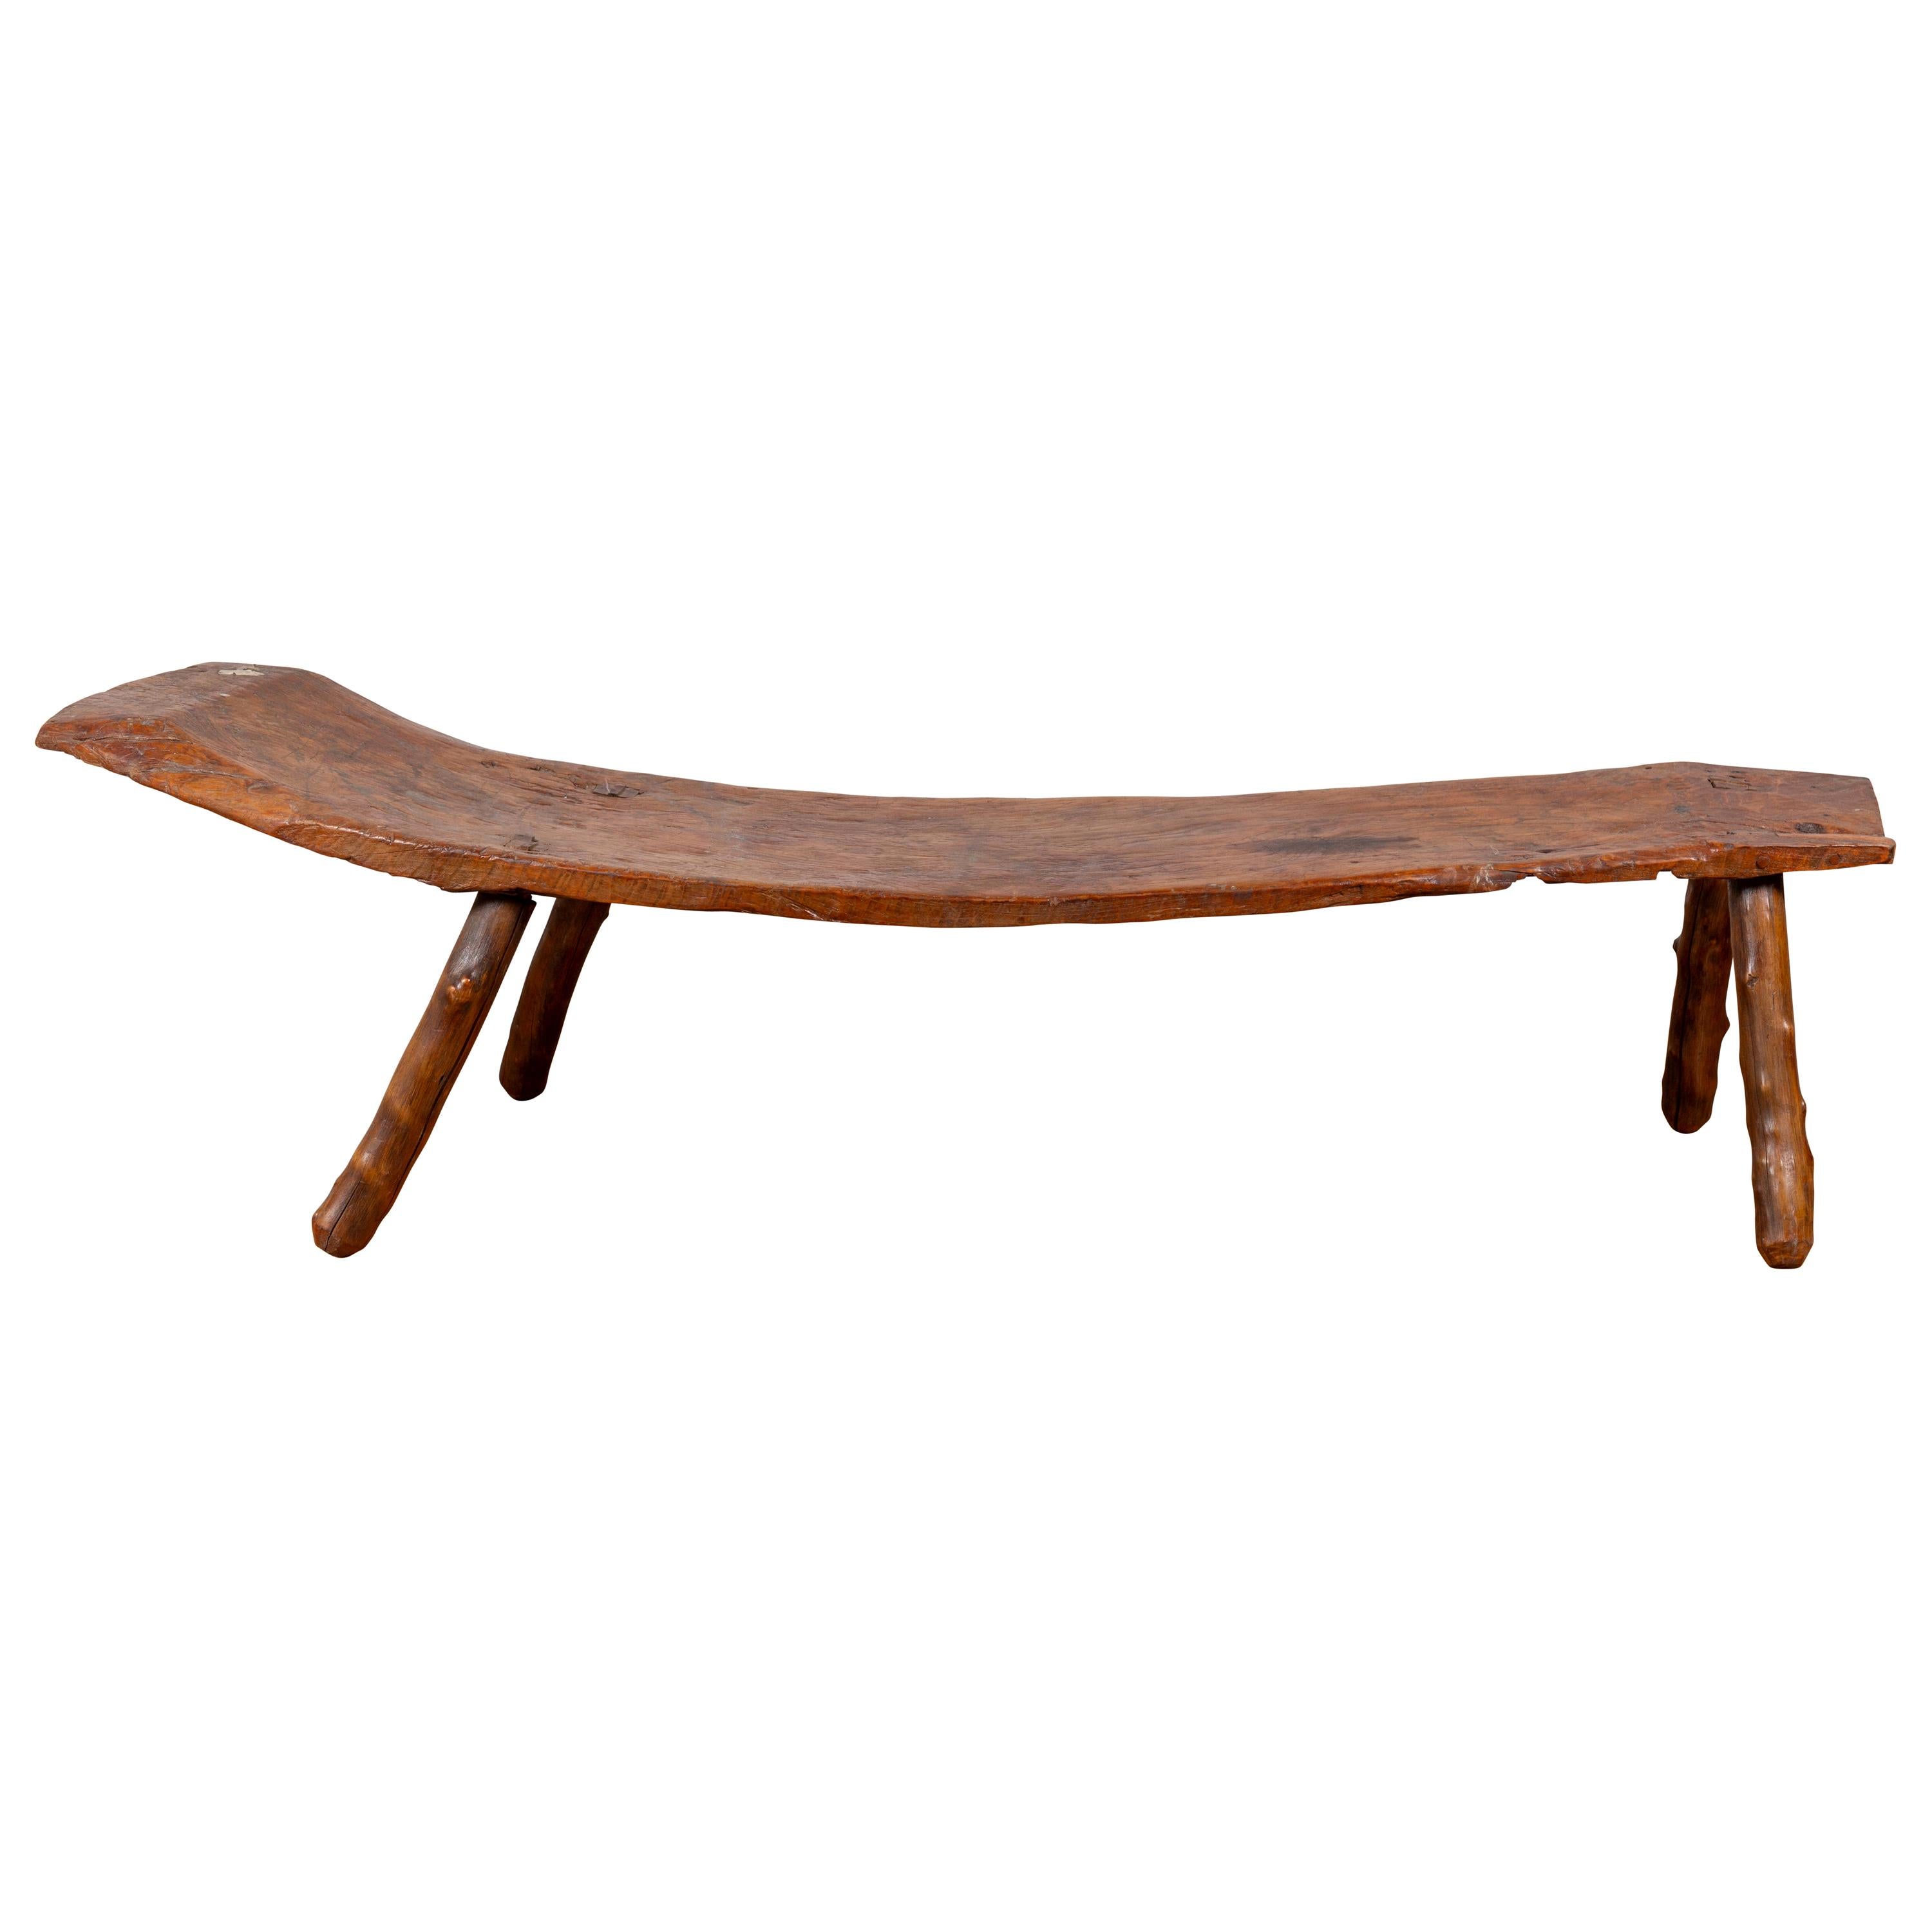 Rustic 19th Century Freeform Javanese Wooden Bench with Weathered Patina